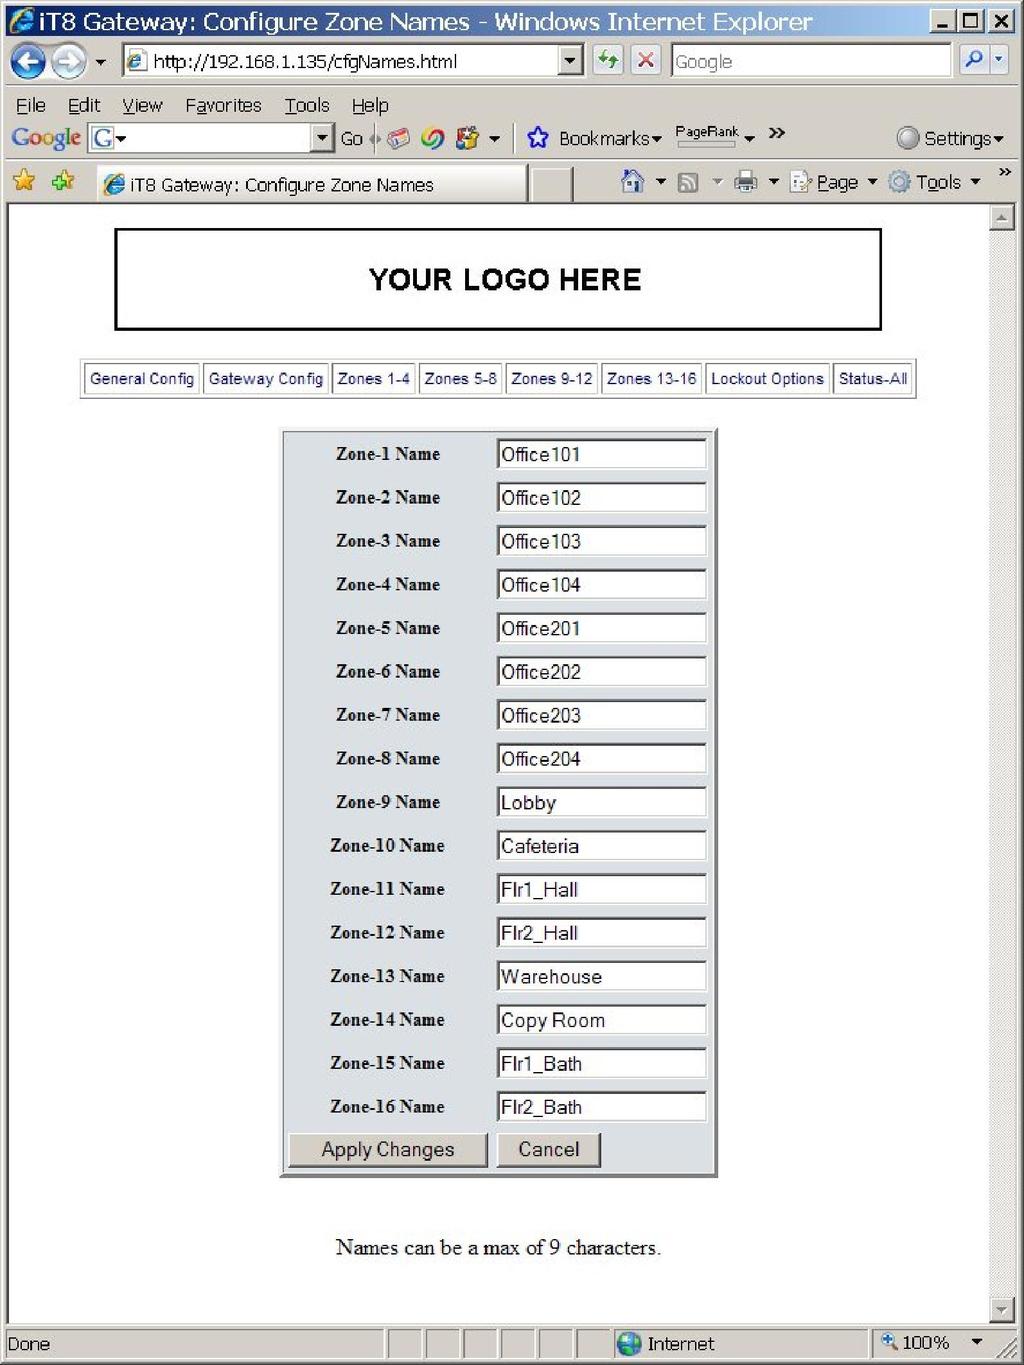 You can use the page shown below to configure a name for each it8 or Zone.